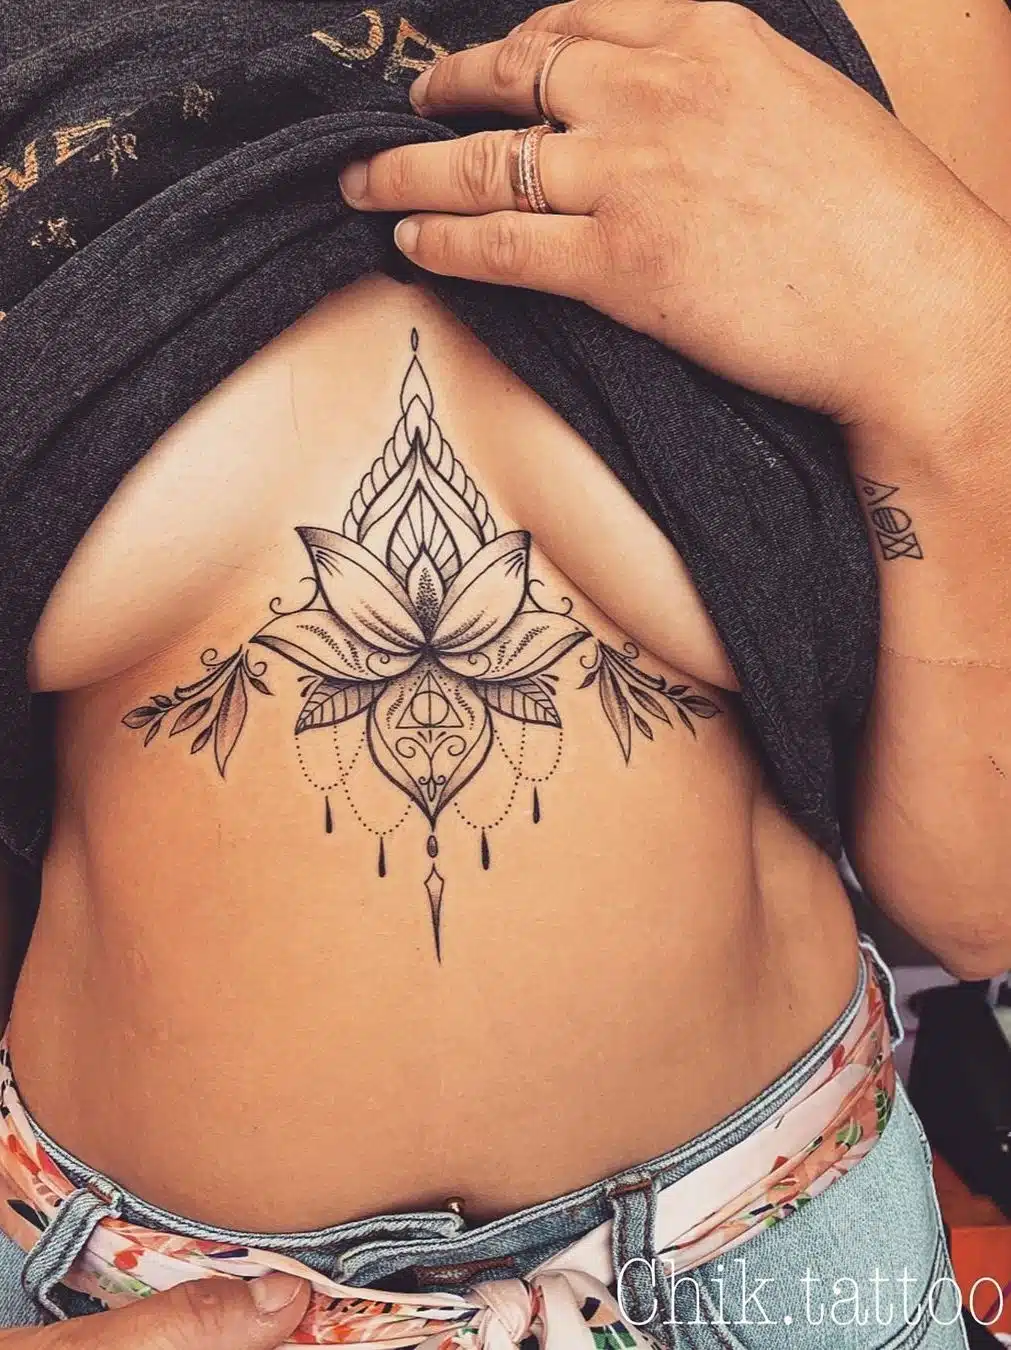 Lotus chest tattoos for women